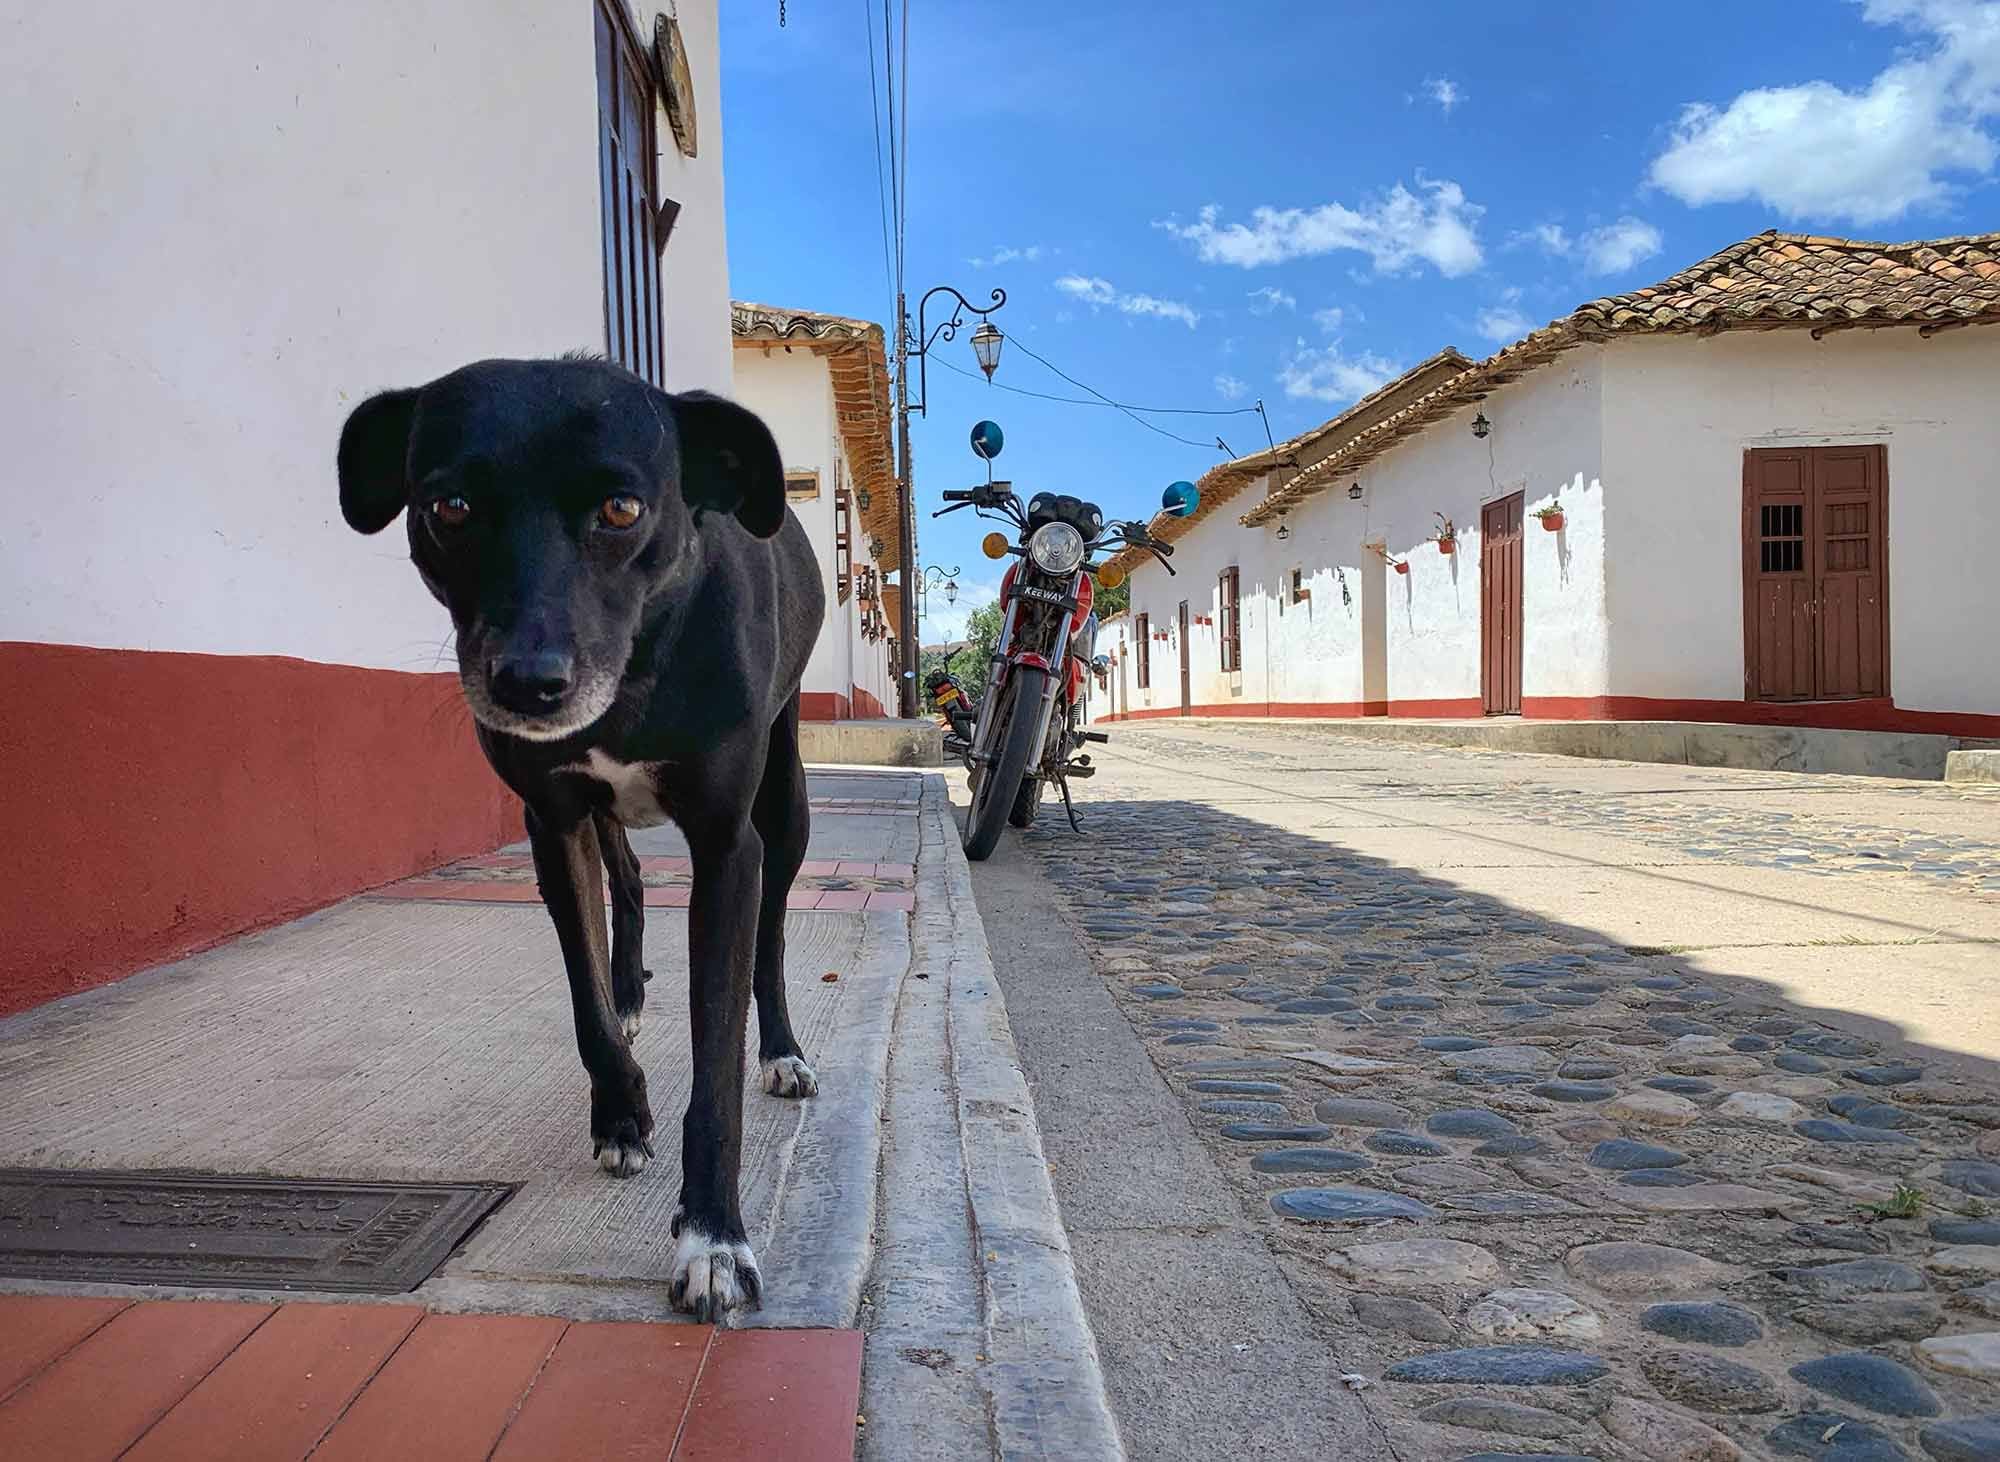 They call her “La Negra.” This dog followed me around all day, into cafes and restaurants, up the mountain to the viewpoint, and back to my guesthouse. She is loved by the whole town.